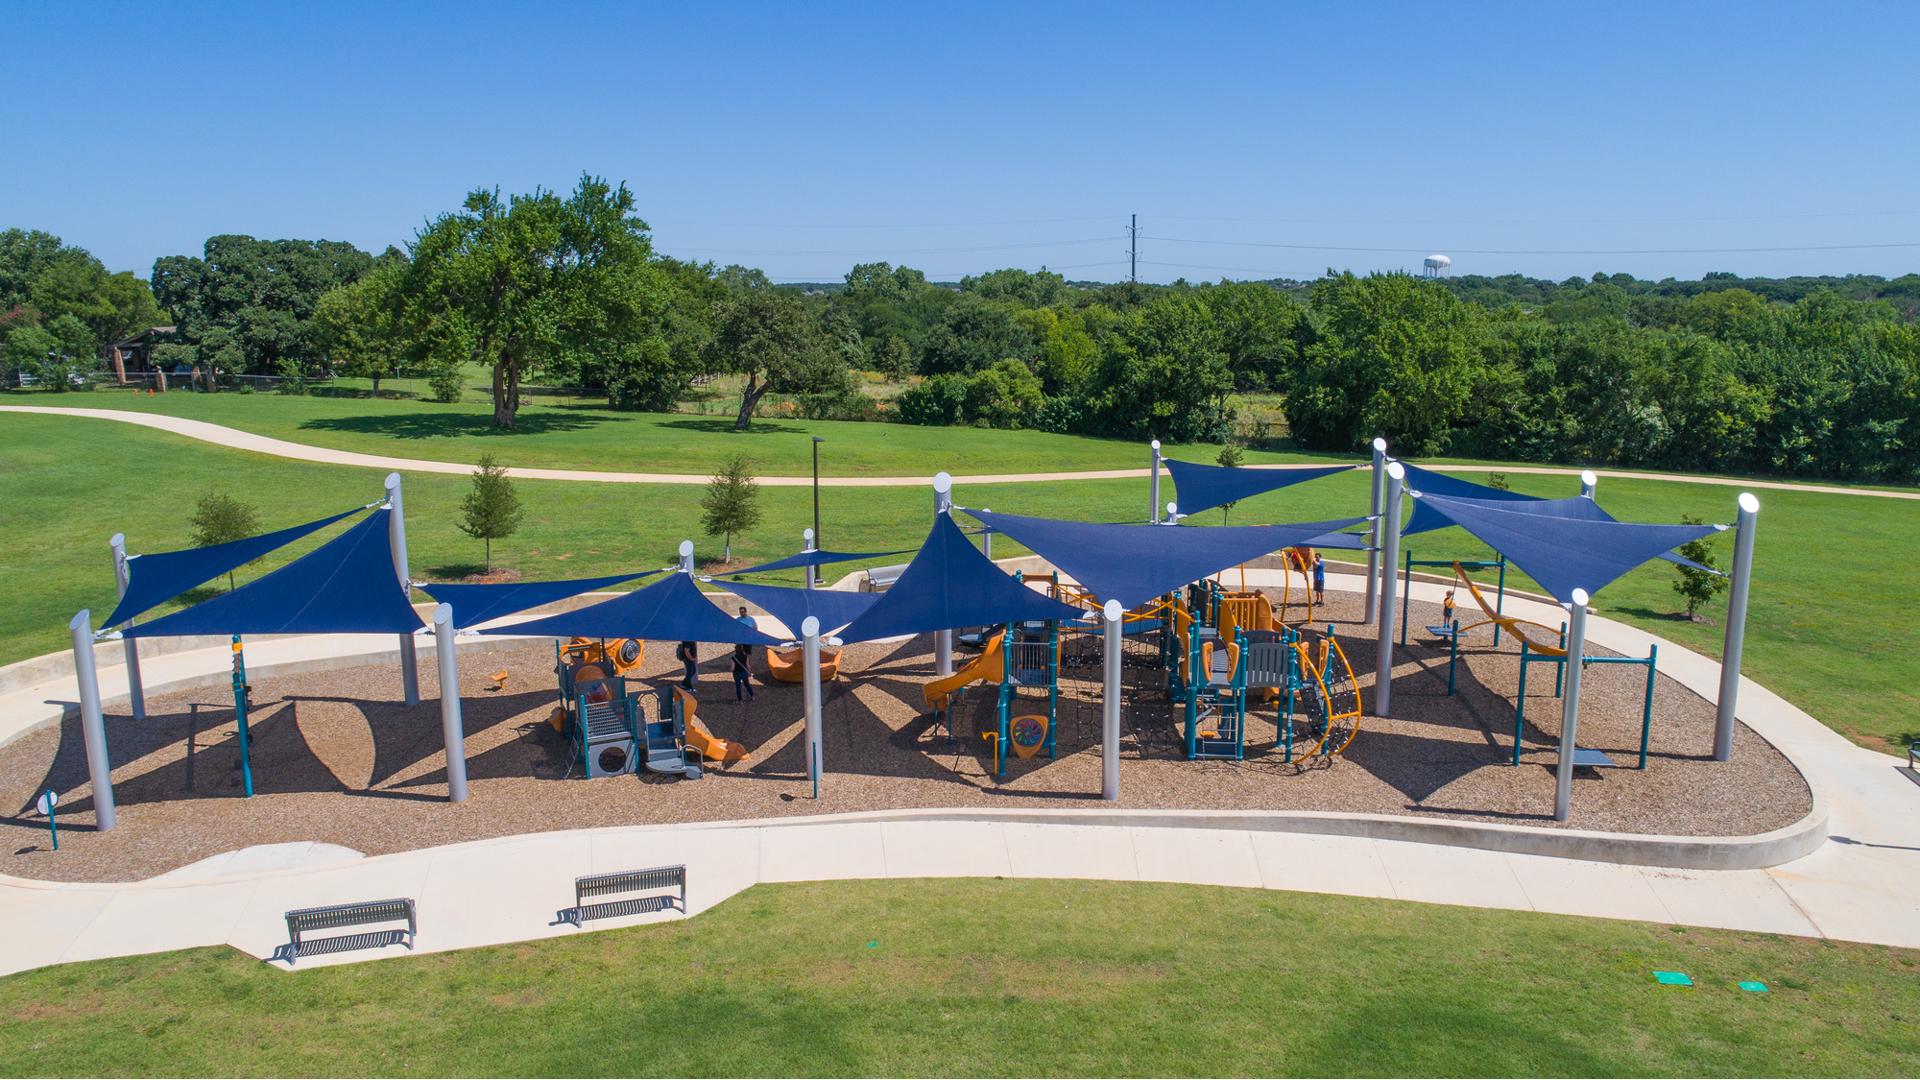 Northfield Park Richland Hills, TX. Features separate play structures, each of which is packed full of engaging playground components like climbers, slides and activity panels. The ZipKrooz®, OmniSpin® spinner, Sensory Play Center®, Oodle Swing® and more. Plus, heavy duty commercial shade sails from SkyWays®